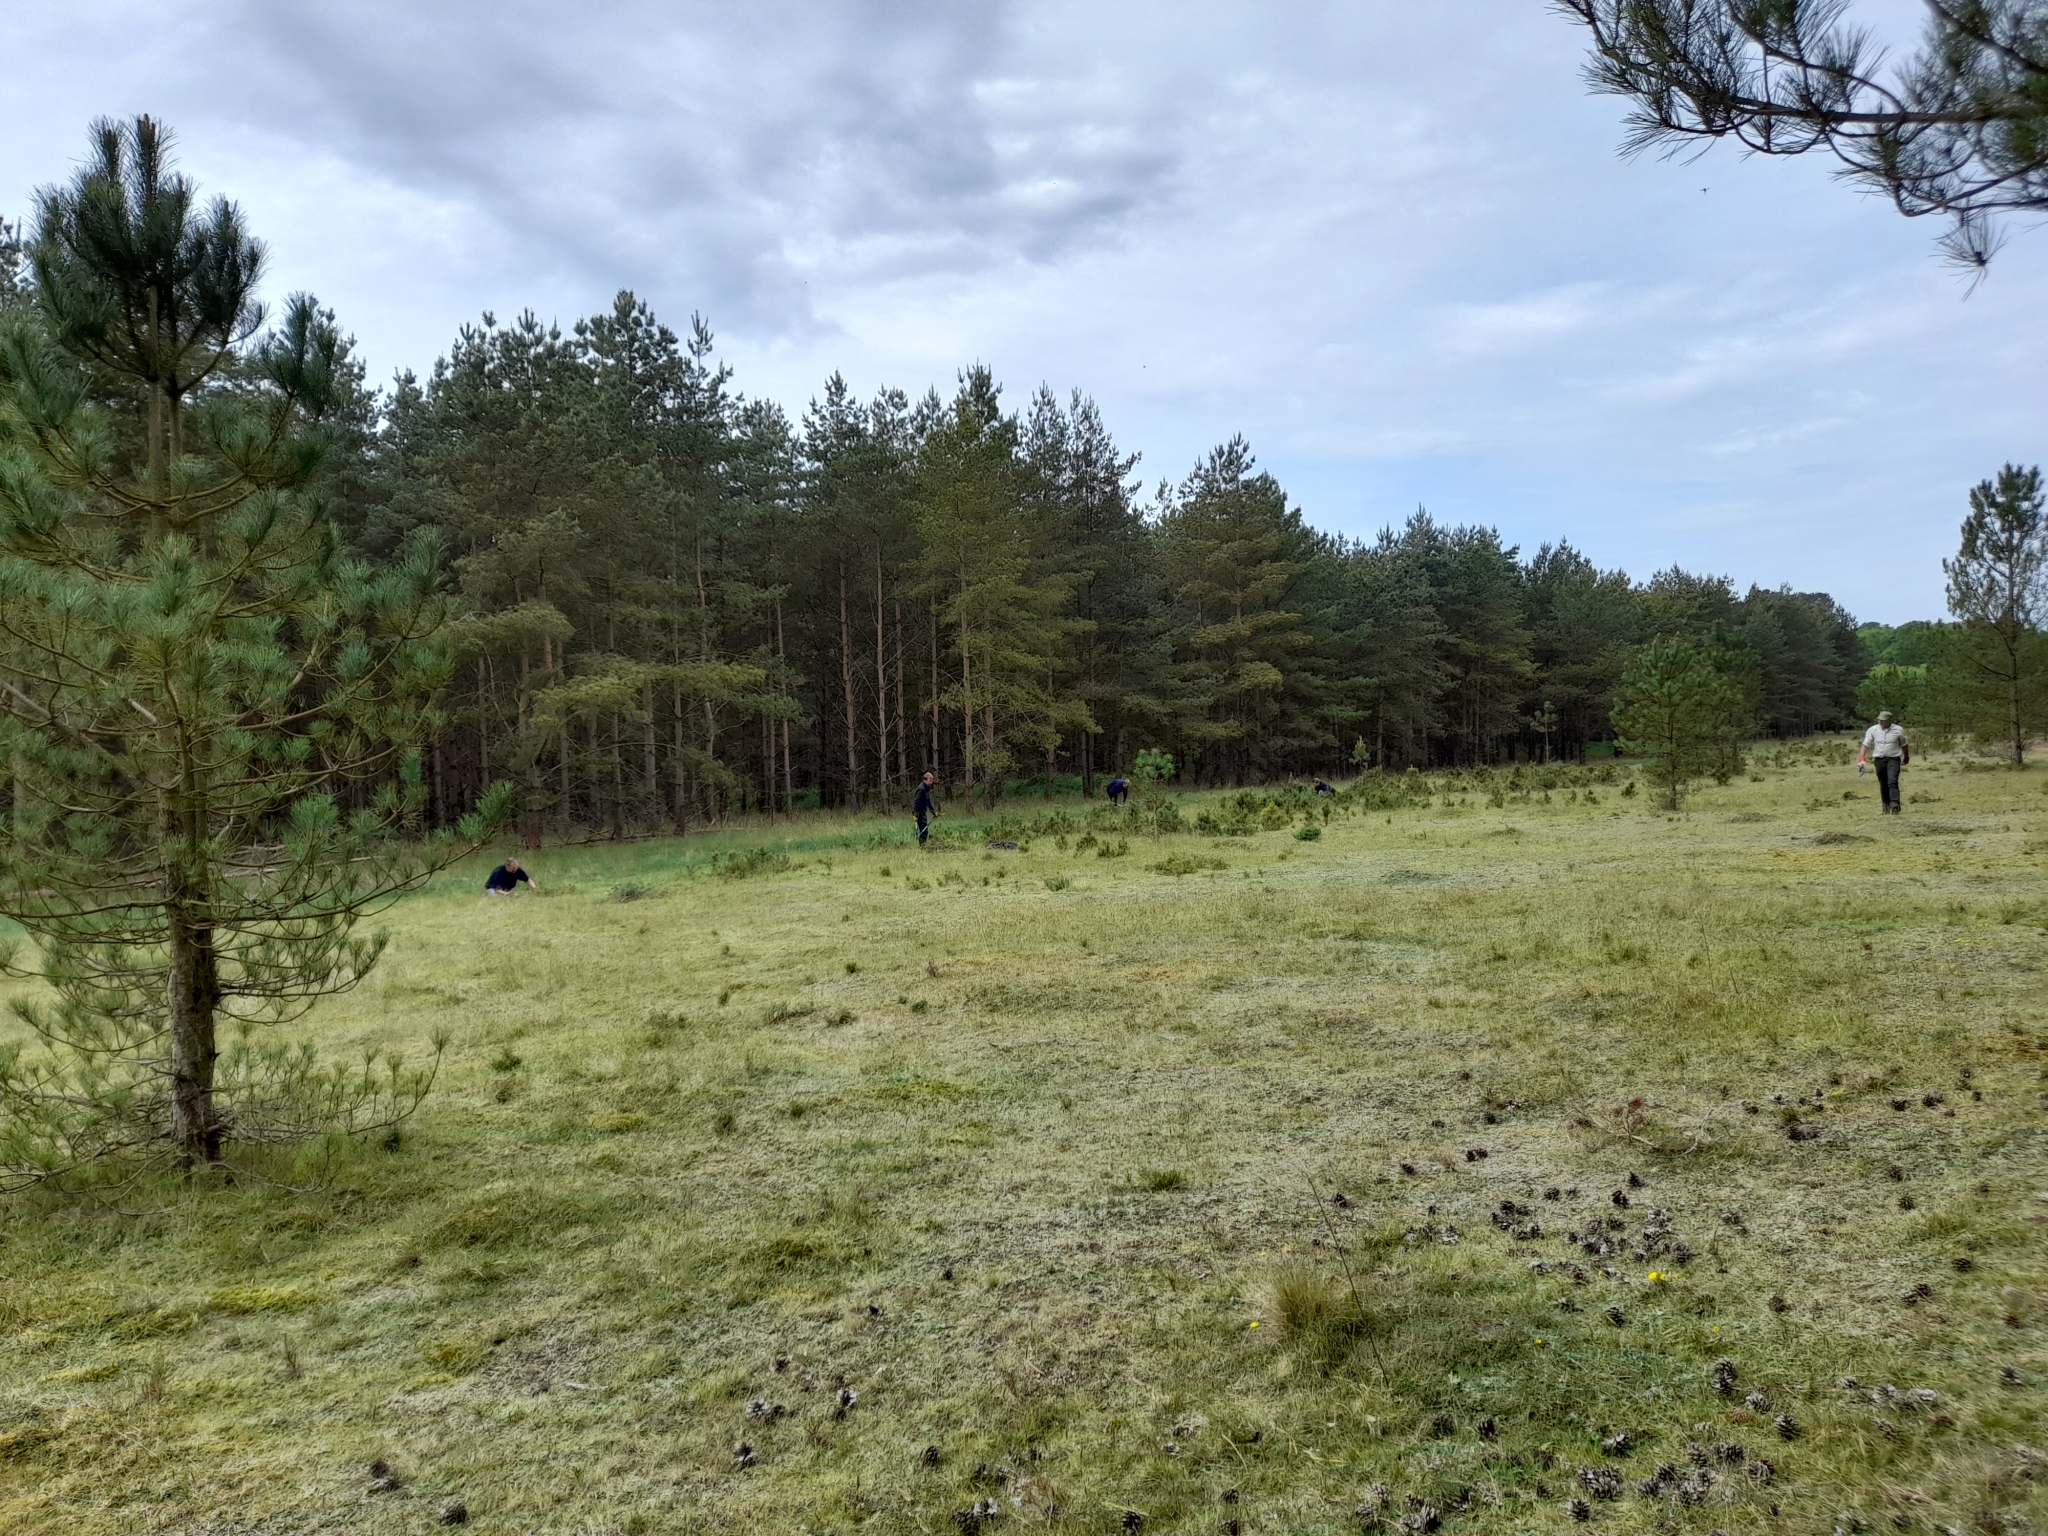 A photo from the FoTF Conservation Event - May 2022 - Self Sown Fir Removal at Kings Forest : A wide angle view of the work area, with volunteers working to remove self sown Firs in the background